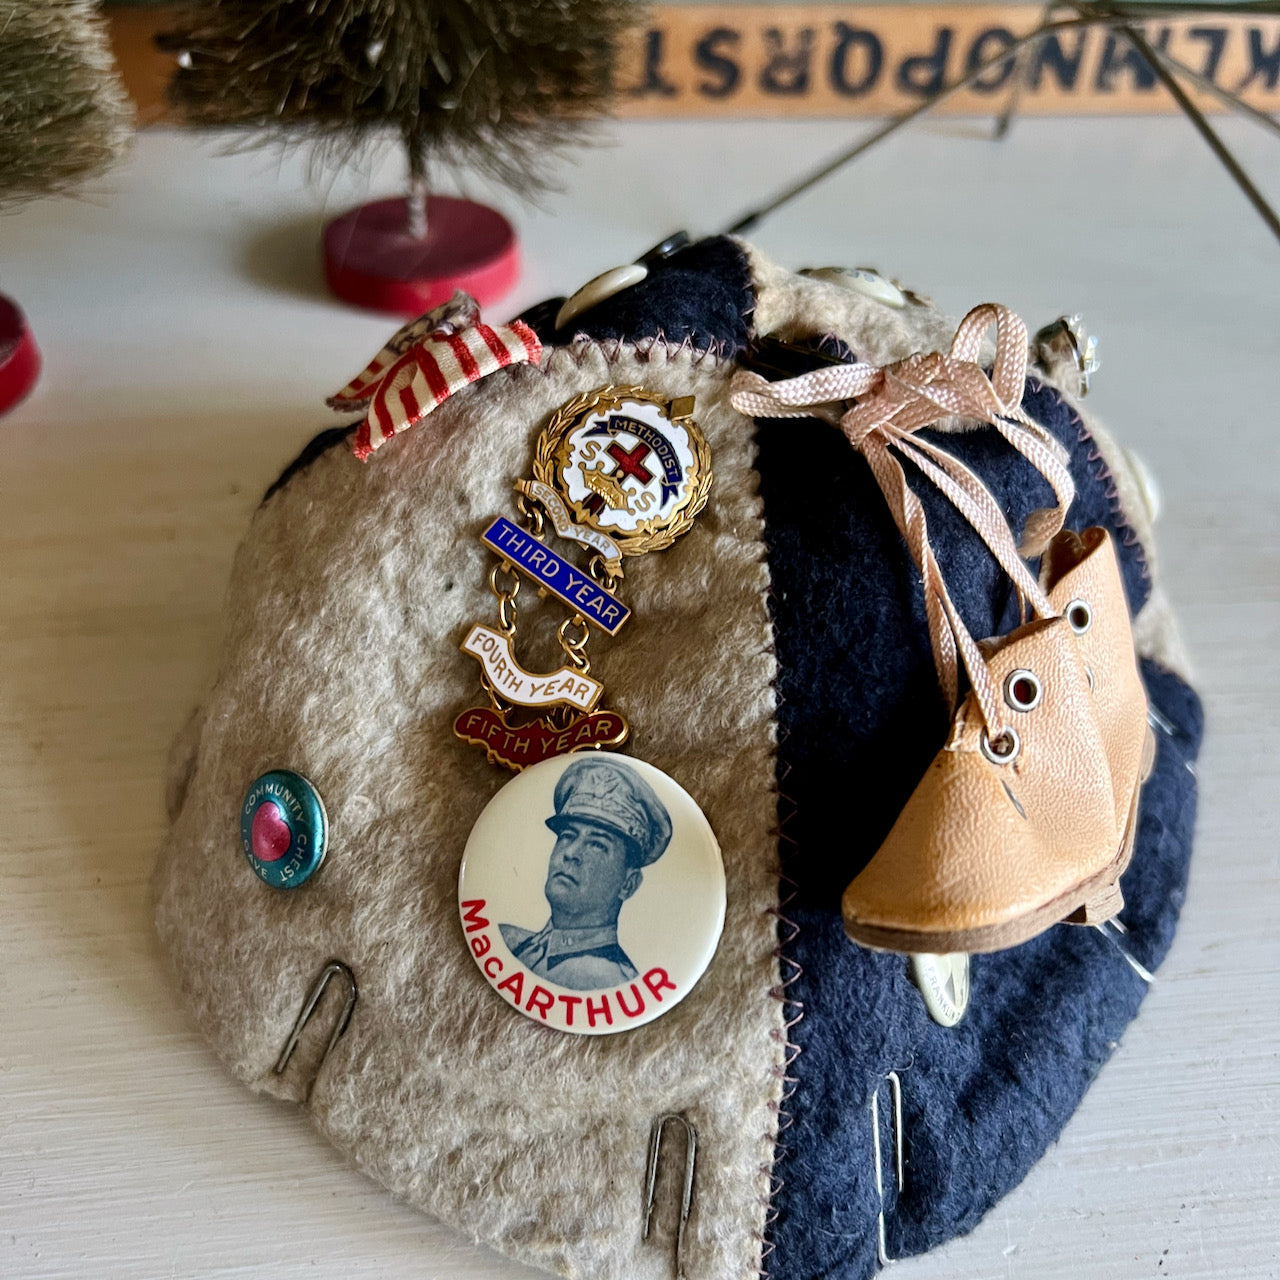 Advertising Felt Beanie with Vintage Charms (c.1930s-1940s)